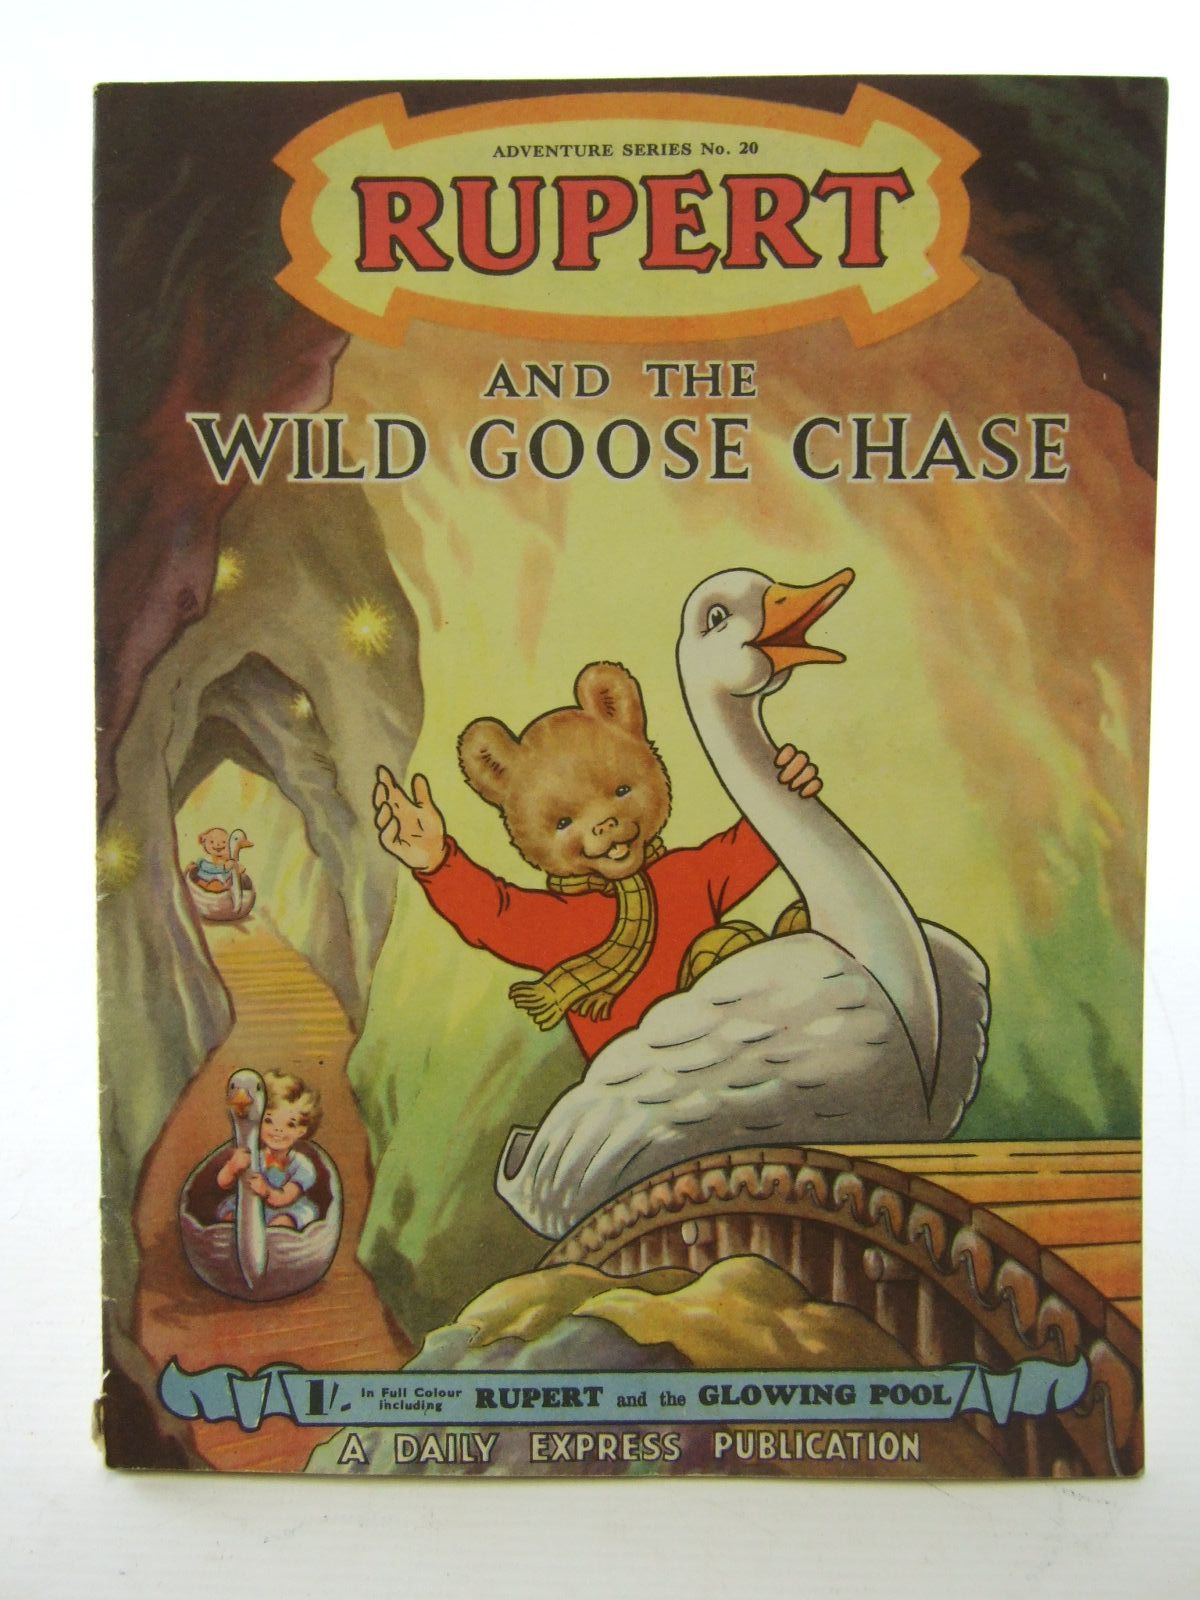 Photo of RUPERT ADVENTURE SERIES No. 20 - RUPERT AND THE WILD GOOSE CHASE written by Bestall, Alfred illustrated by Bestall, Alfred published by Daily Express (STOCK CODE: 1706110)  for sale by Stella & Rose's Books